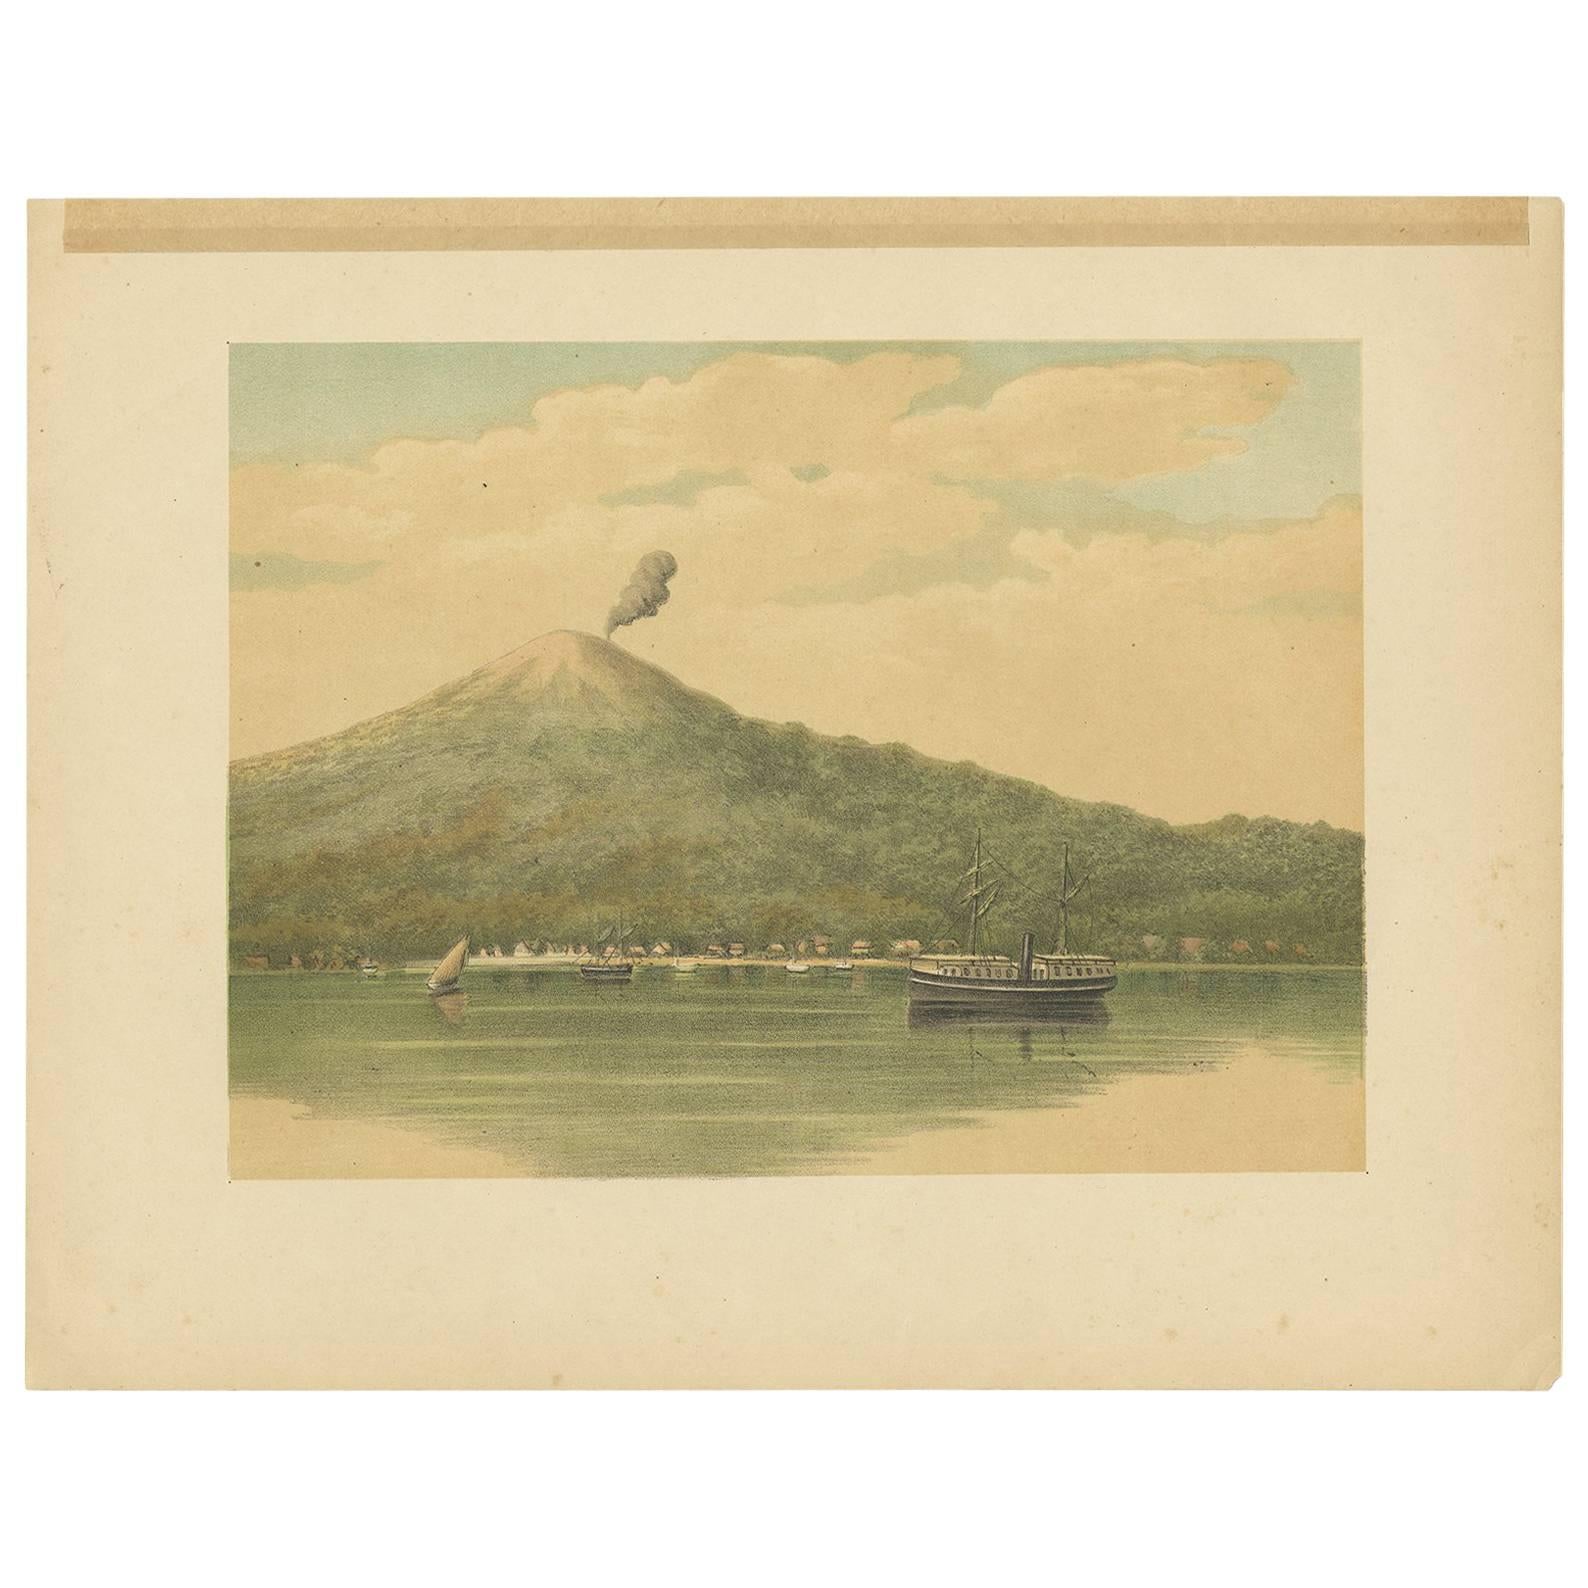 Antique Print of the Volcano of Ternate by M.T.H. Perelaer, 1888